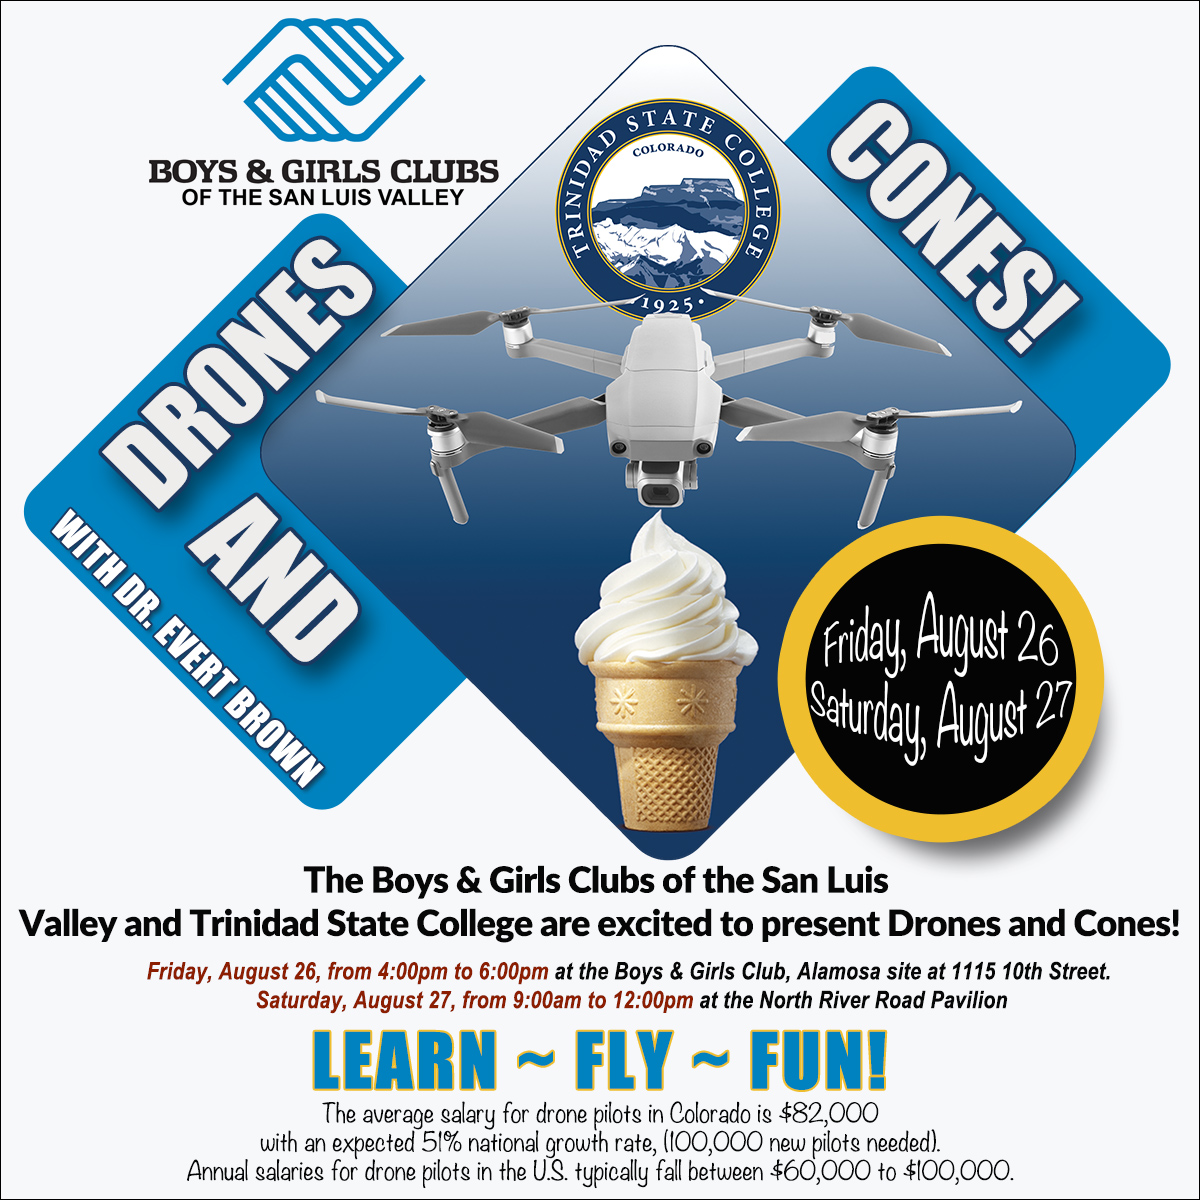 Drones and Cones helps Valley youth develop career skills